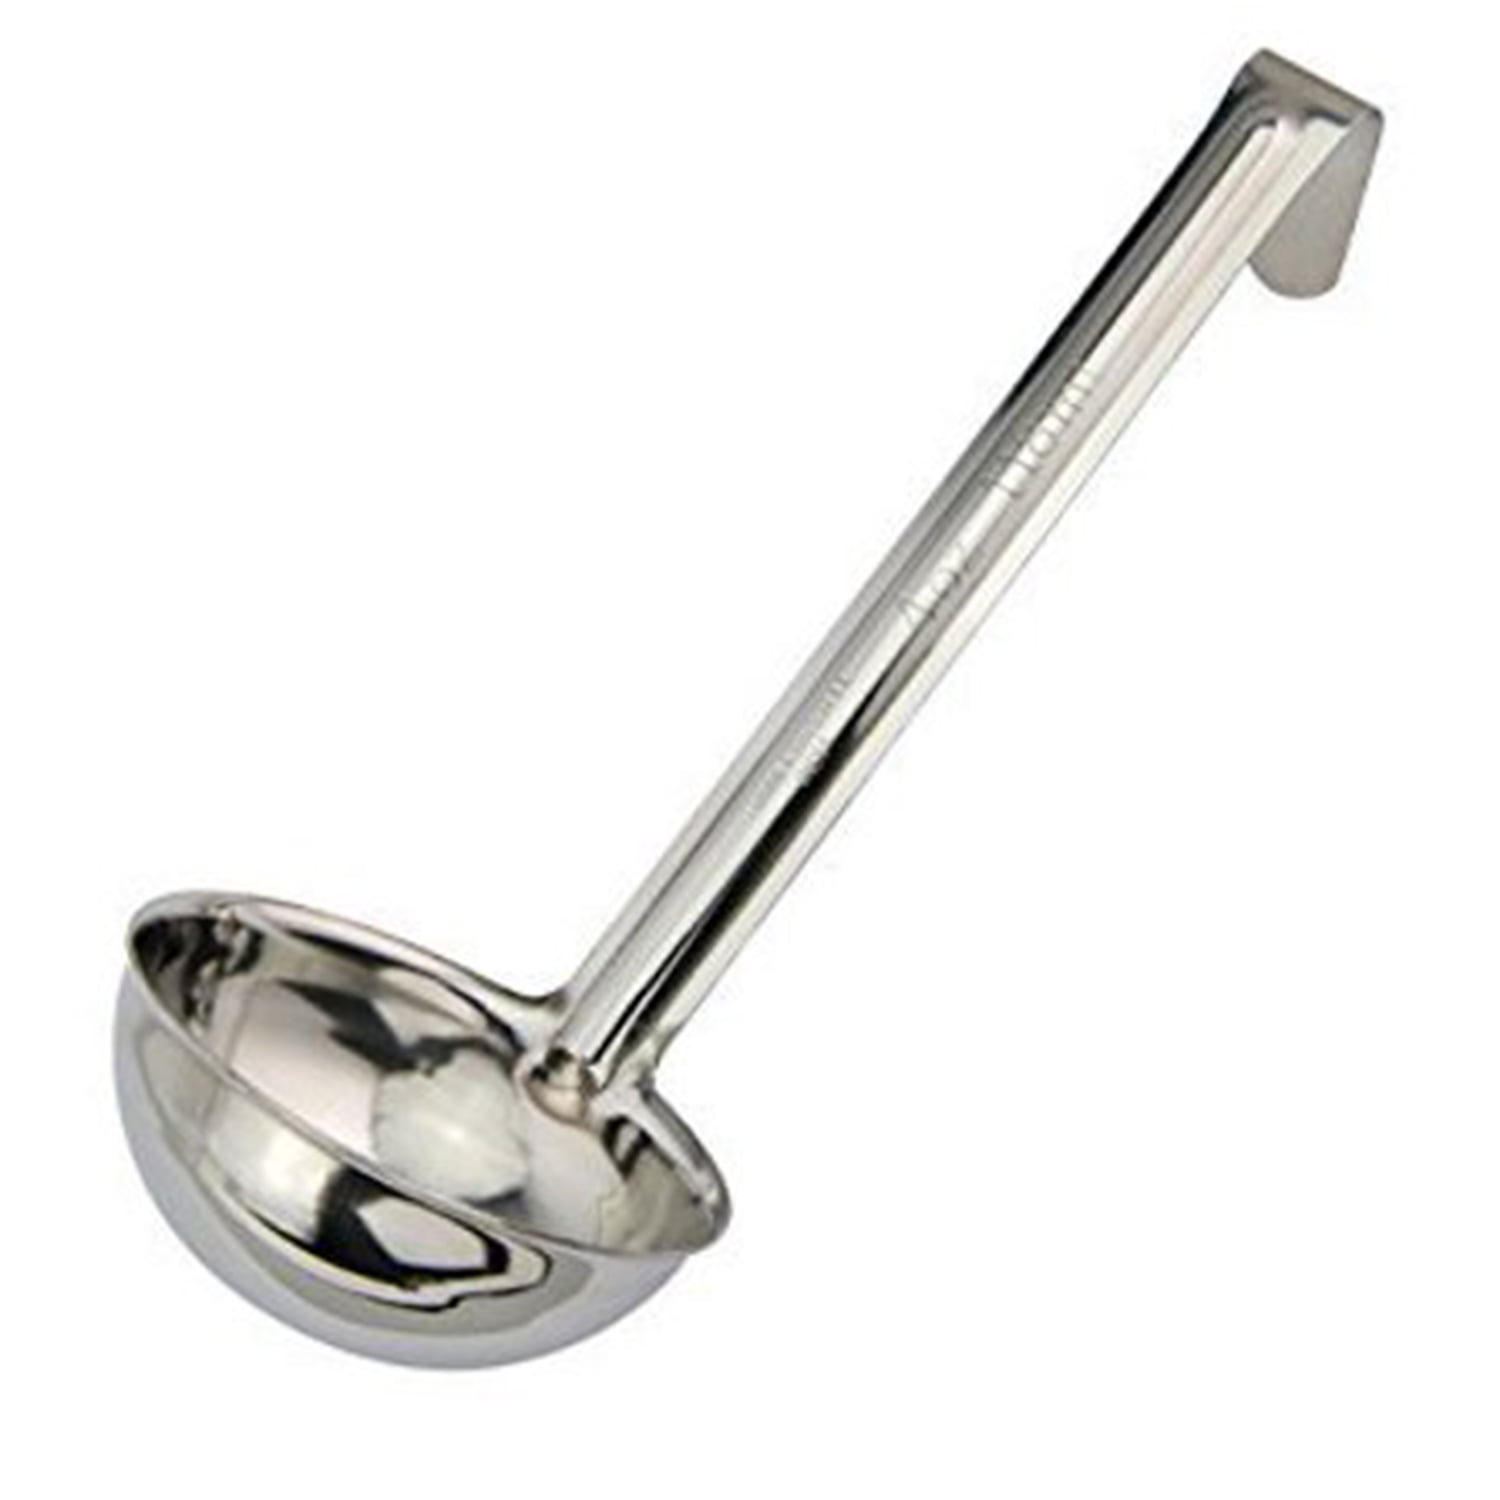 Solid Serving Spoon 4 Oz Stainless Steel Soup Ladle with 6-Inch Handle NSF Winco LDI-40SH One Piece Sauce Portioner 